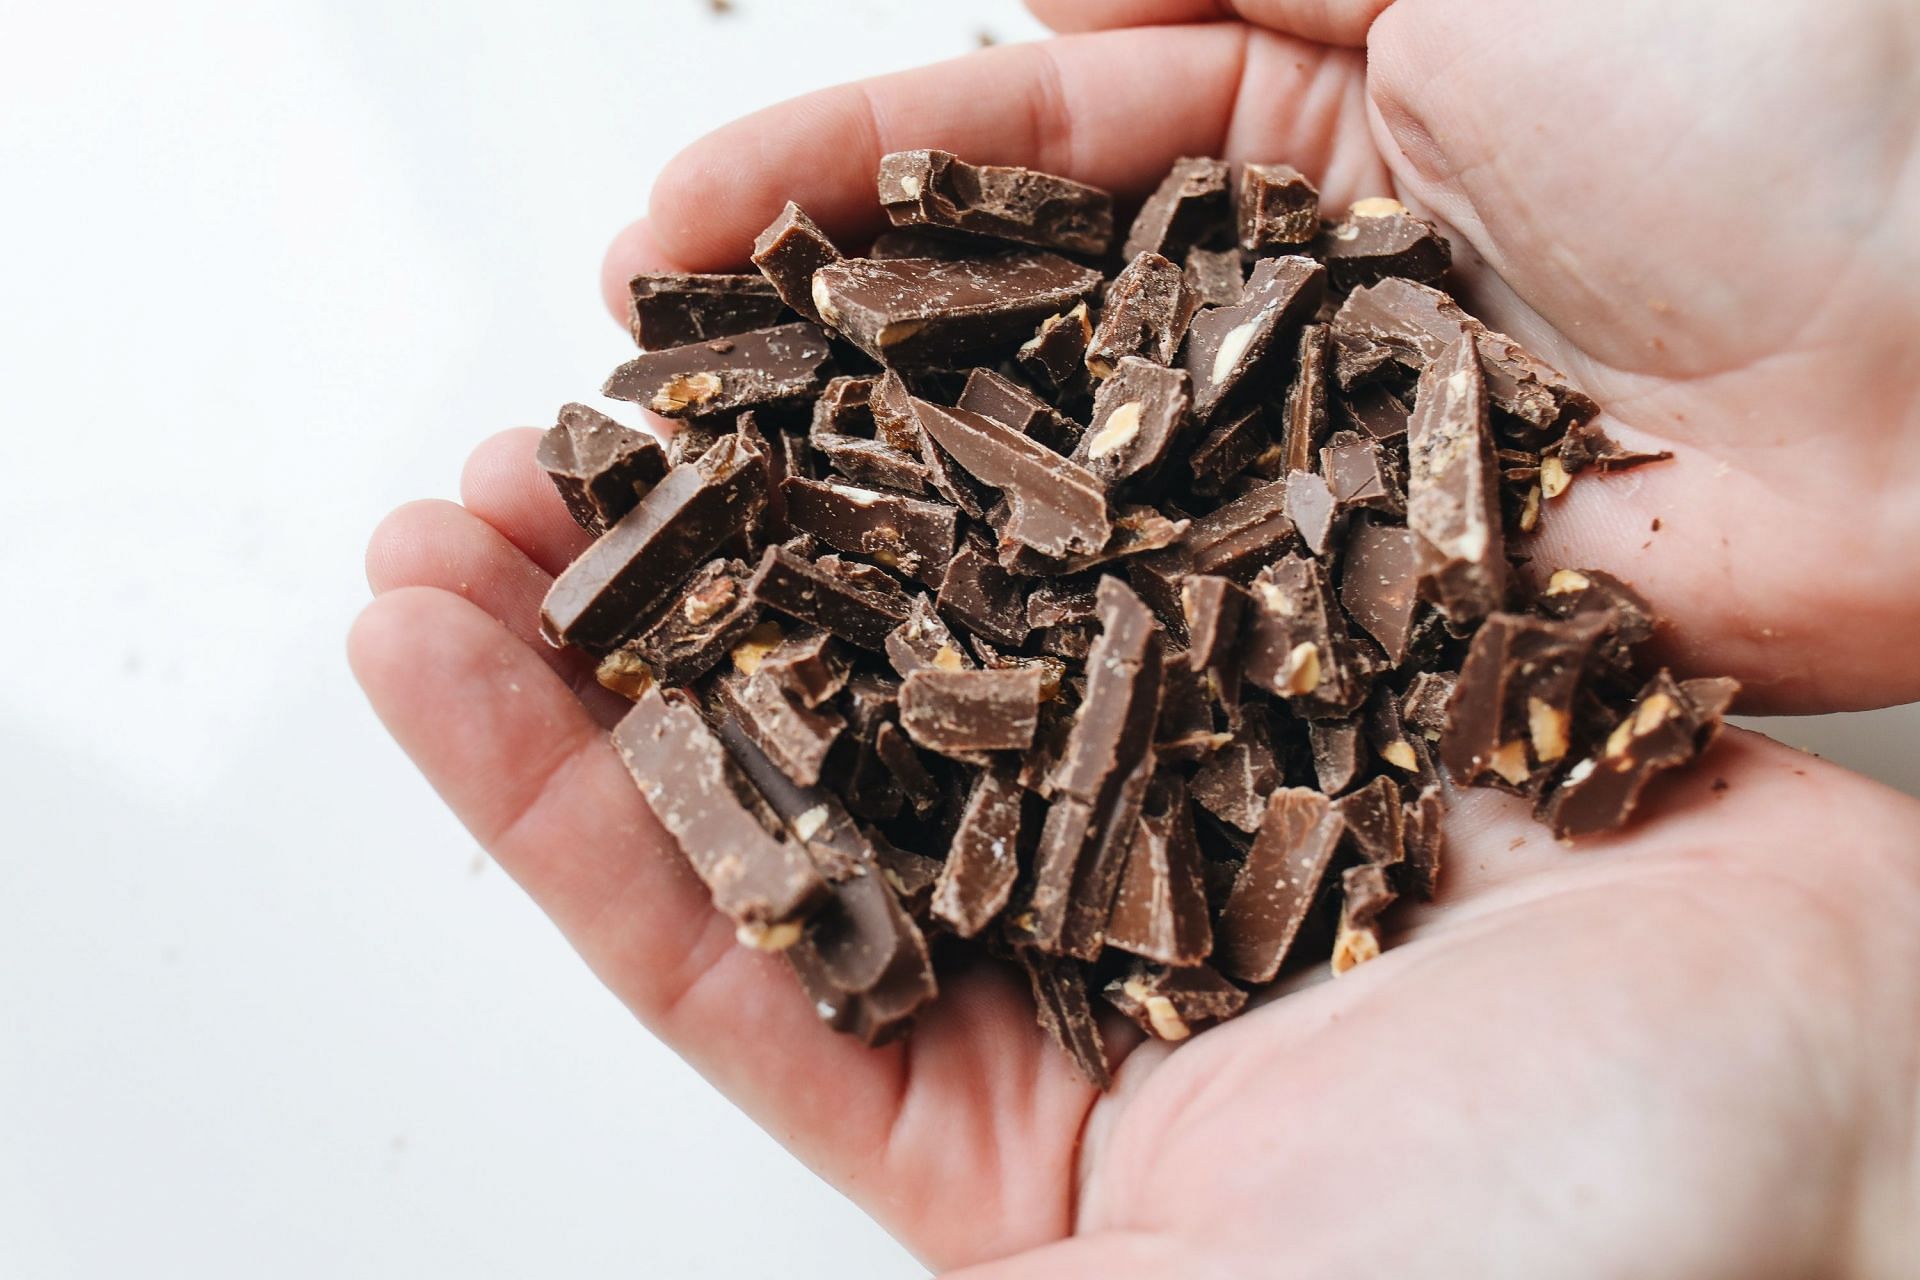 Why are there metals in chocolate? (Image via Pexels / Polina Tankelivitch)